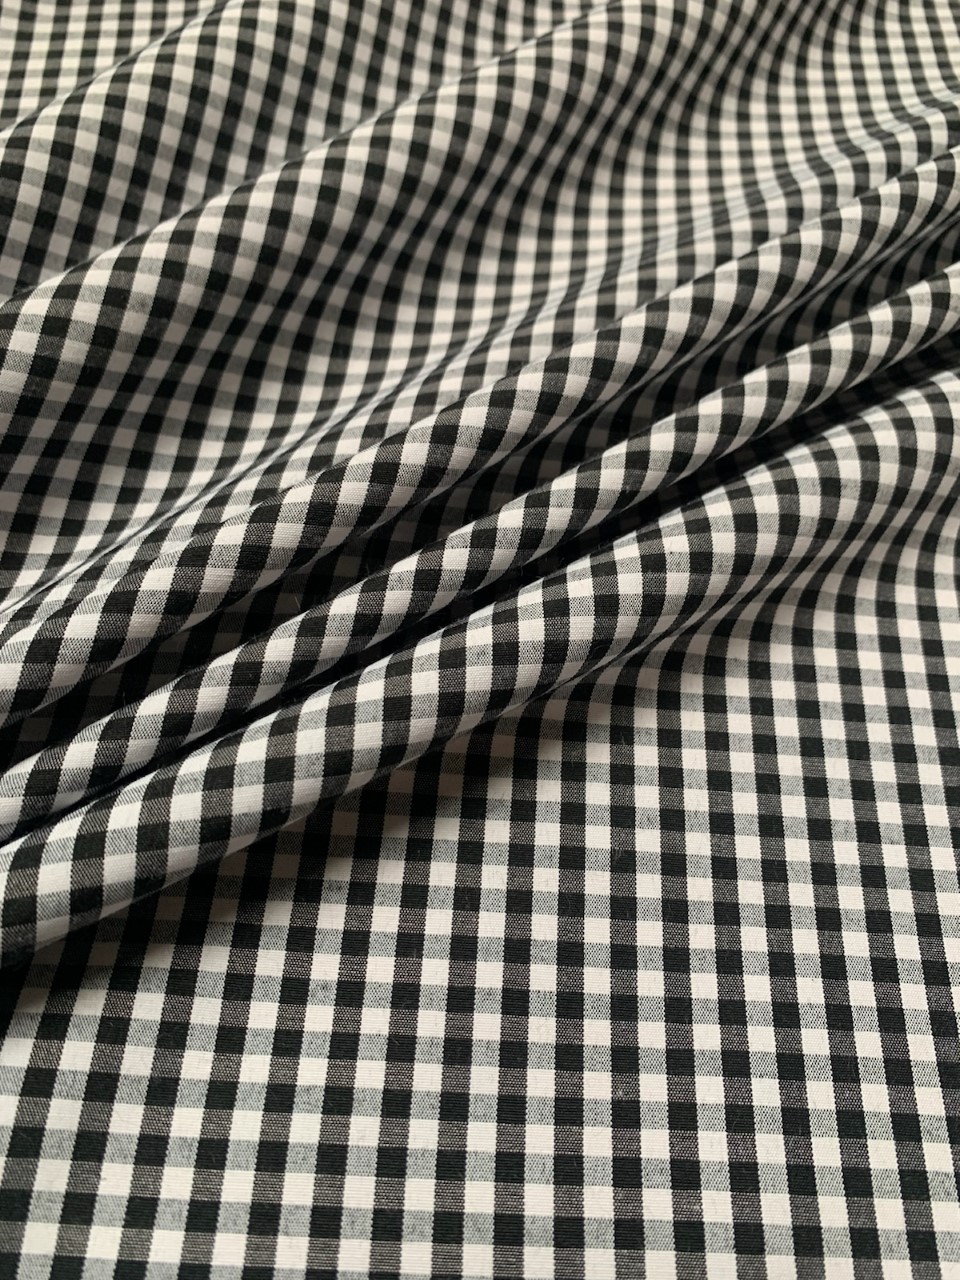 1/8" Black Gingham Fabric 60"Wide By The Yard Poly Cotton Blend